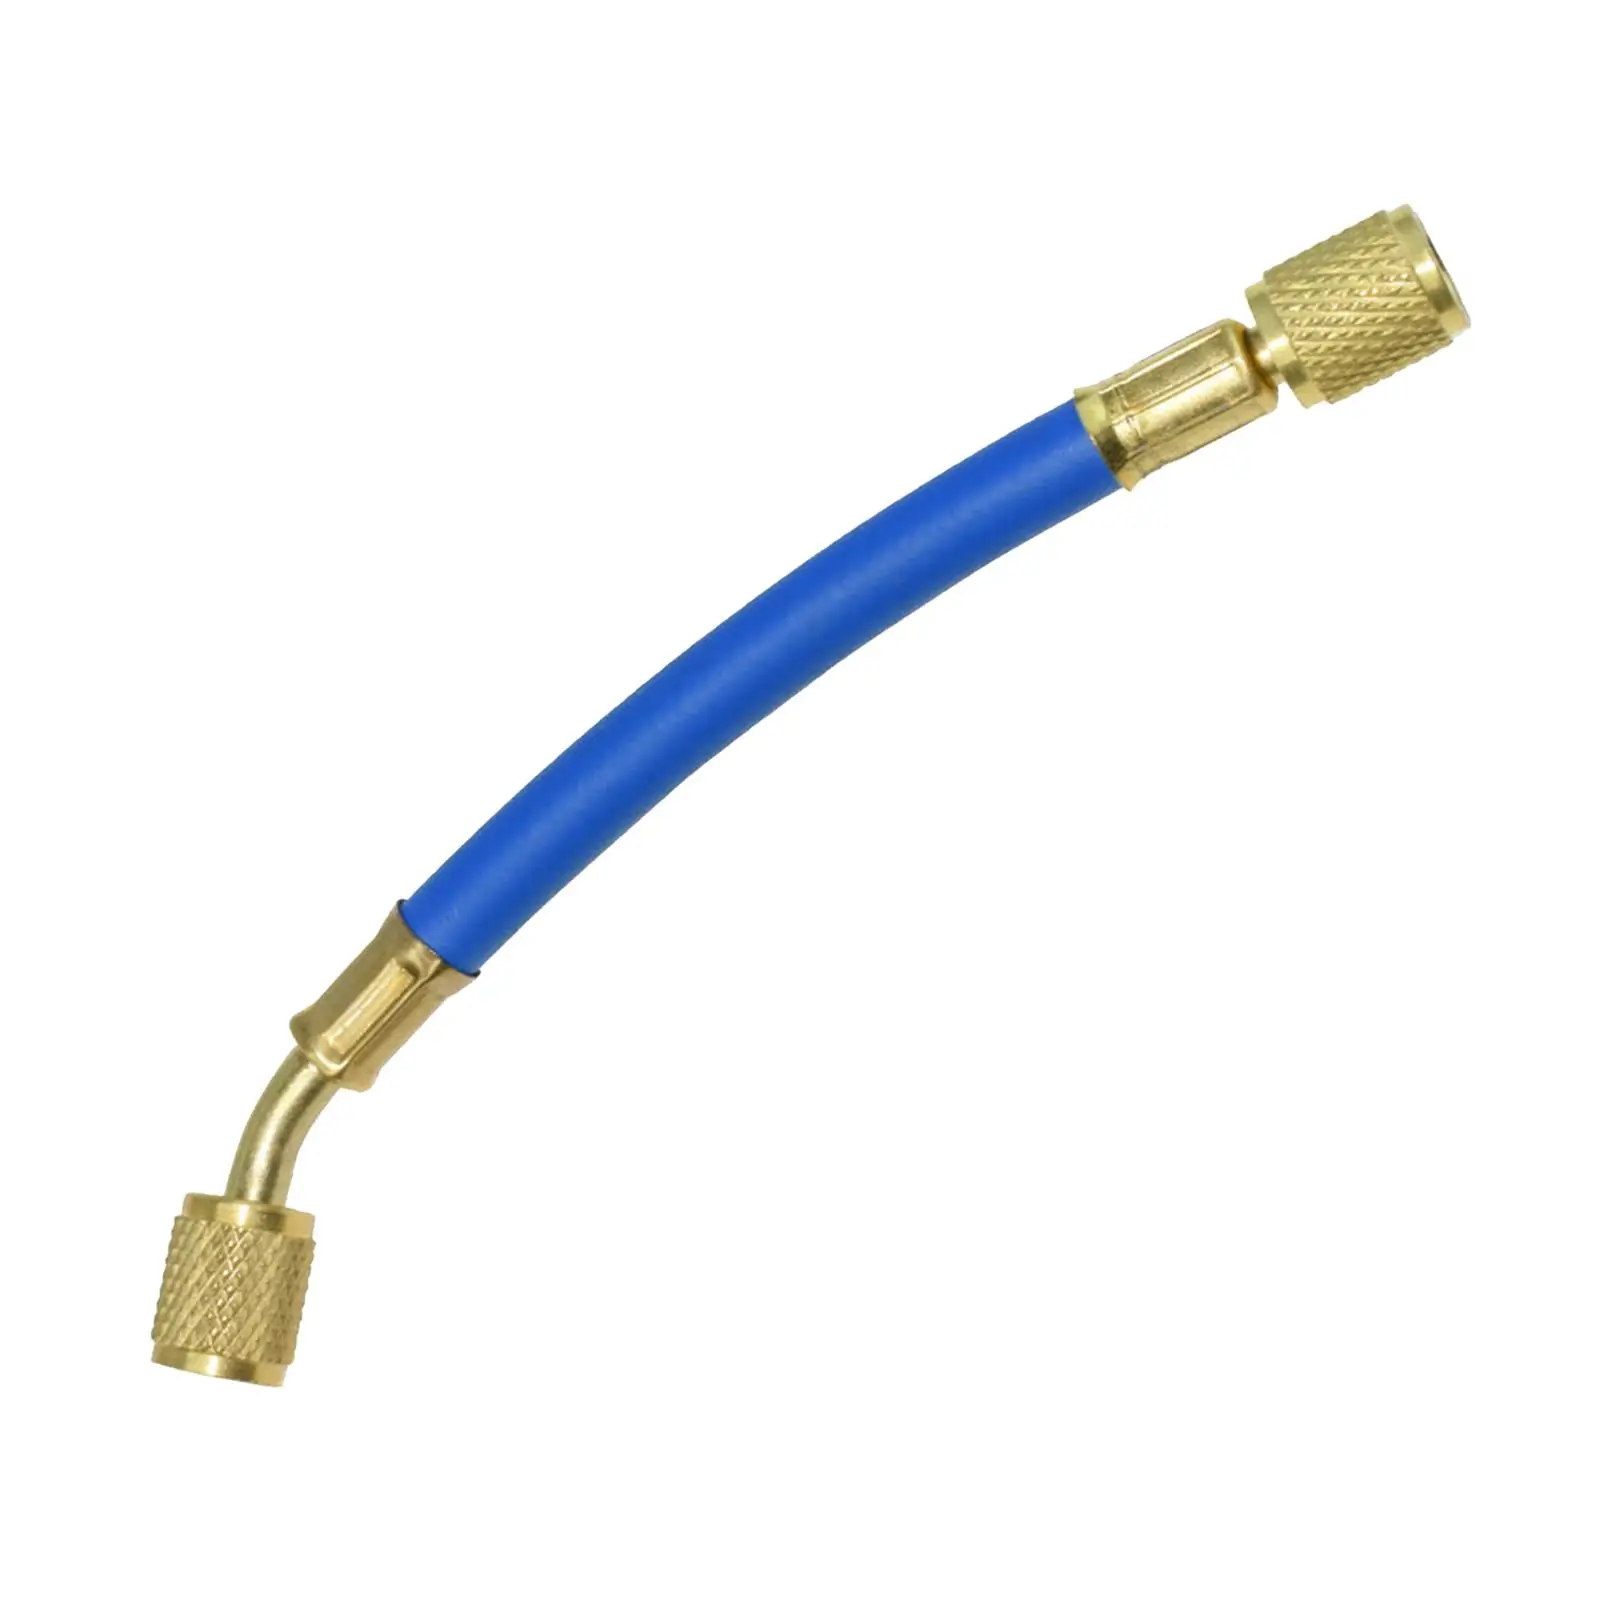 Auto Condensation Hoses Coolant Refill Tool 15cm 1/4in SAE Coupler Replace Tool R12 R22 Low Pressure for Motorcycle Car